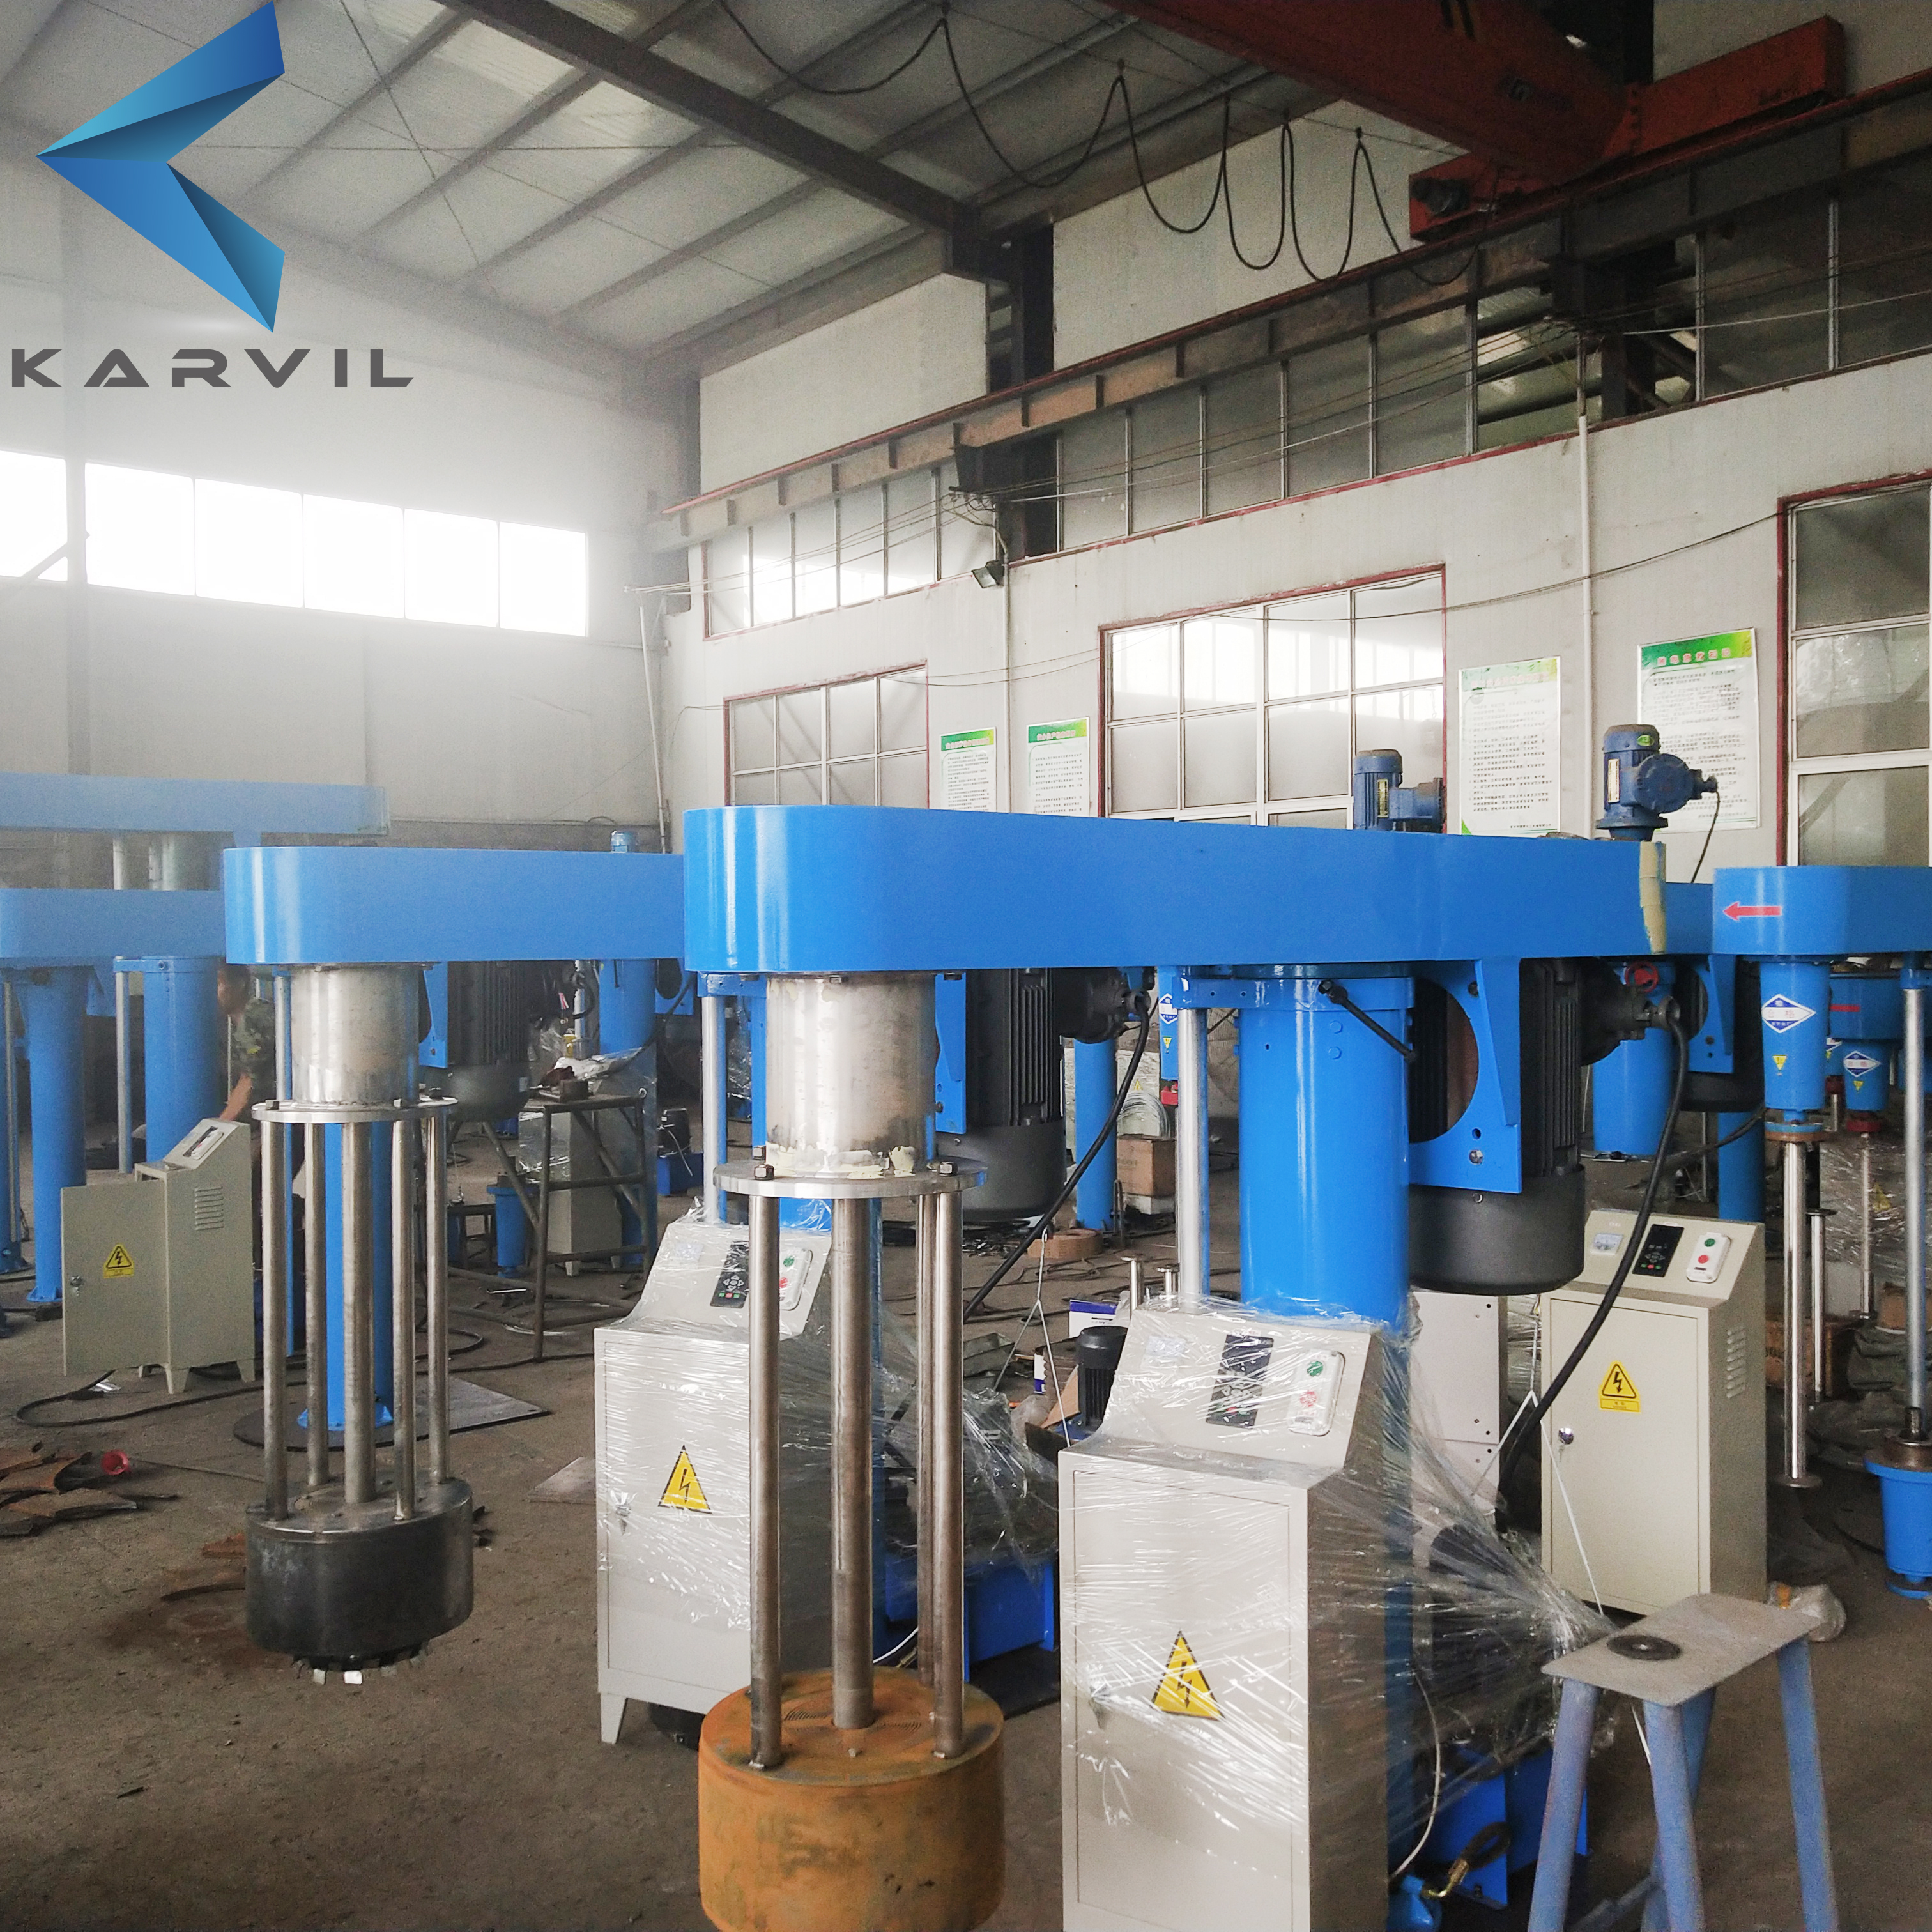 KARVIL ordinary frequency conversion paint mixer LM37